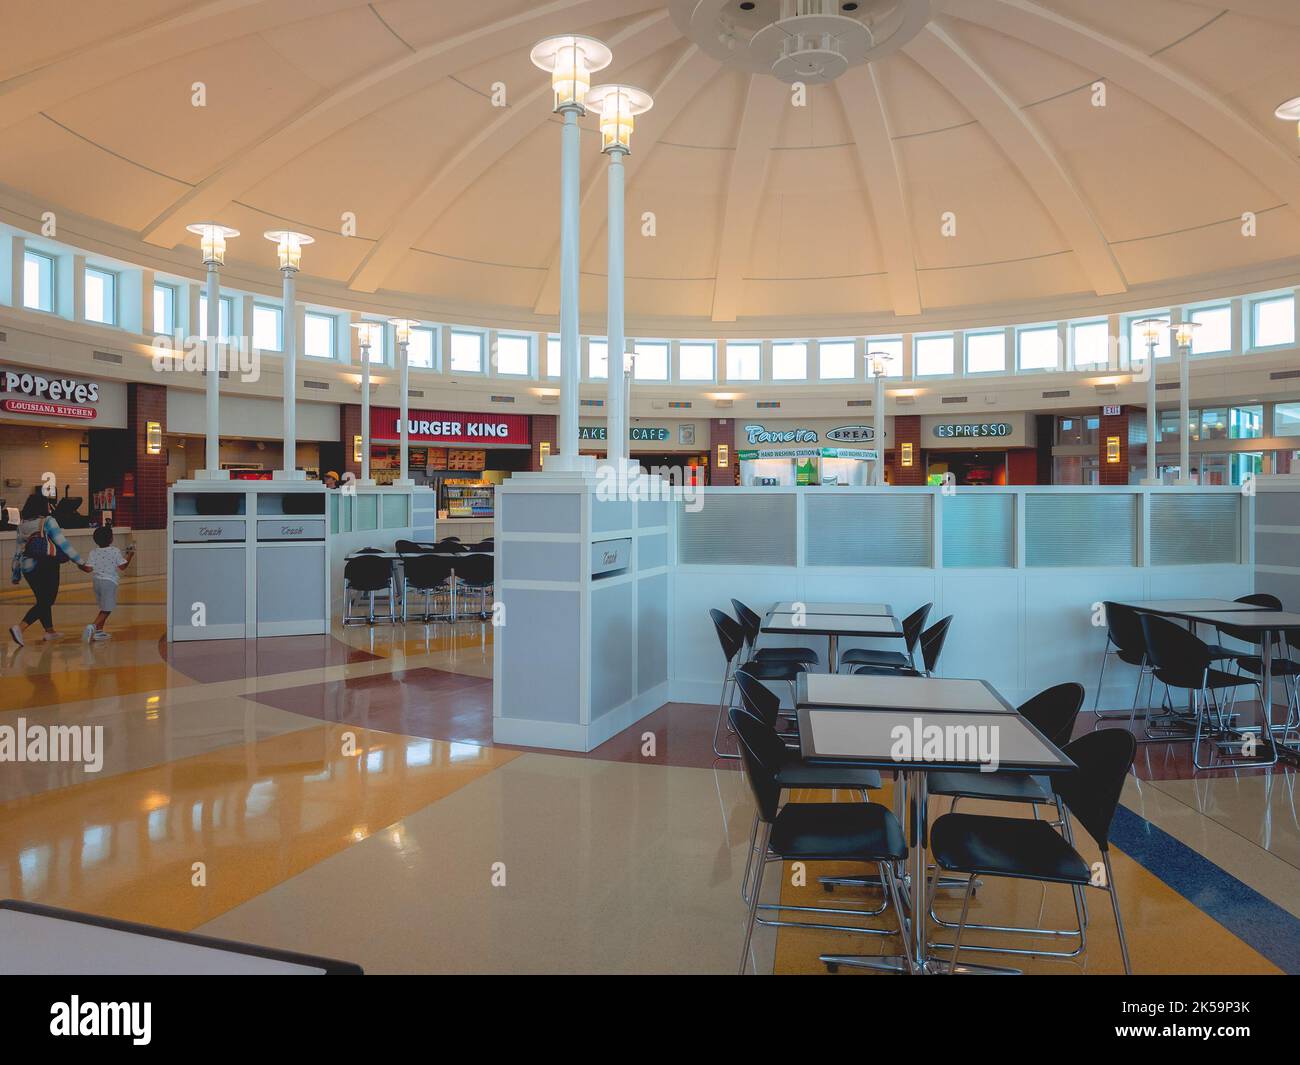 Ohio Turnpike, Genoa, Ohio - Sep 11, 2022: Landscape Interior Wide View of Wyandot Service Plaza Building Interior with Shops and Restaurant in Backgr Stock Photo